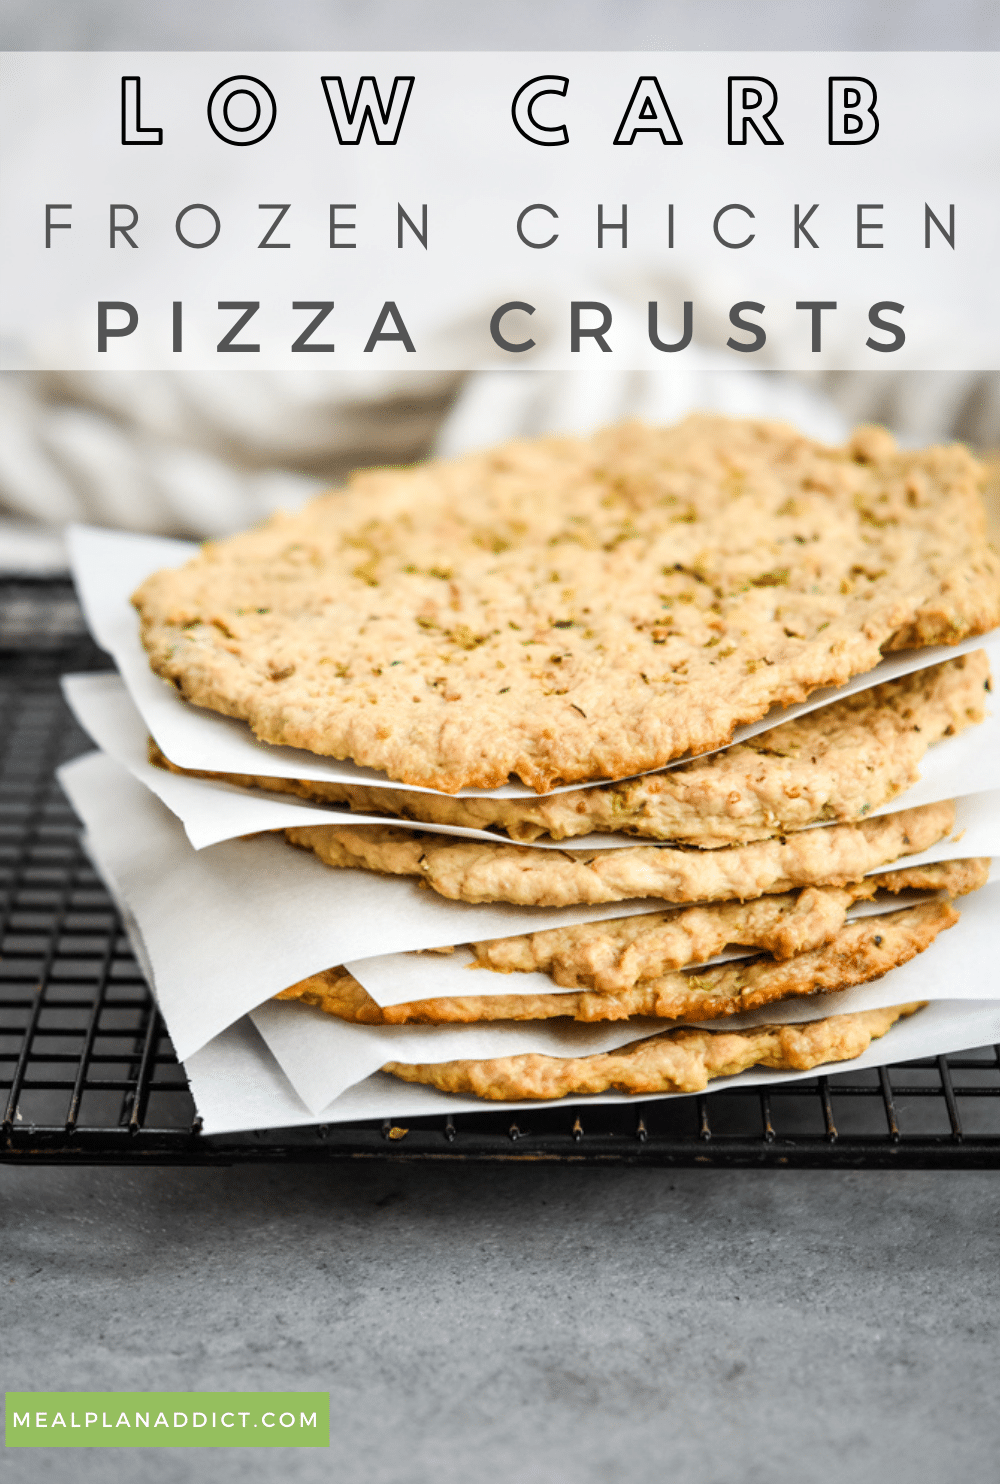 Low carb pizza crust pin for Pinterest